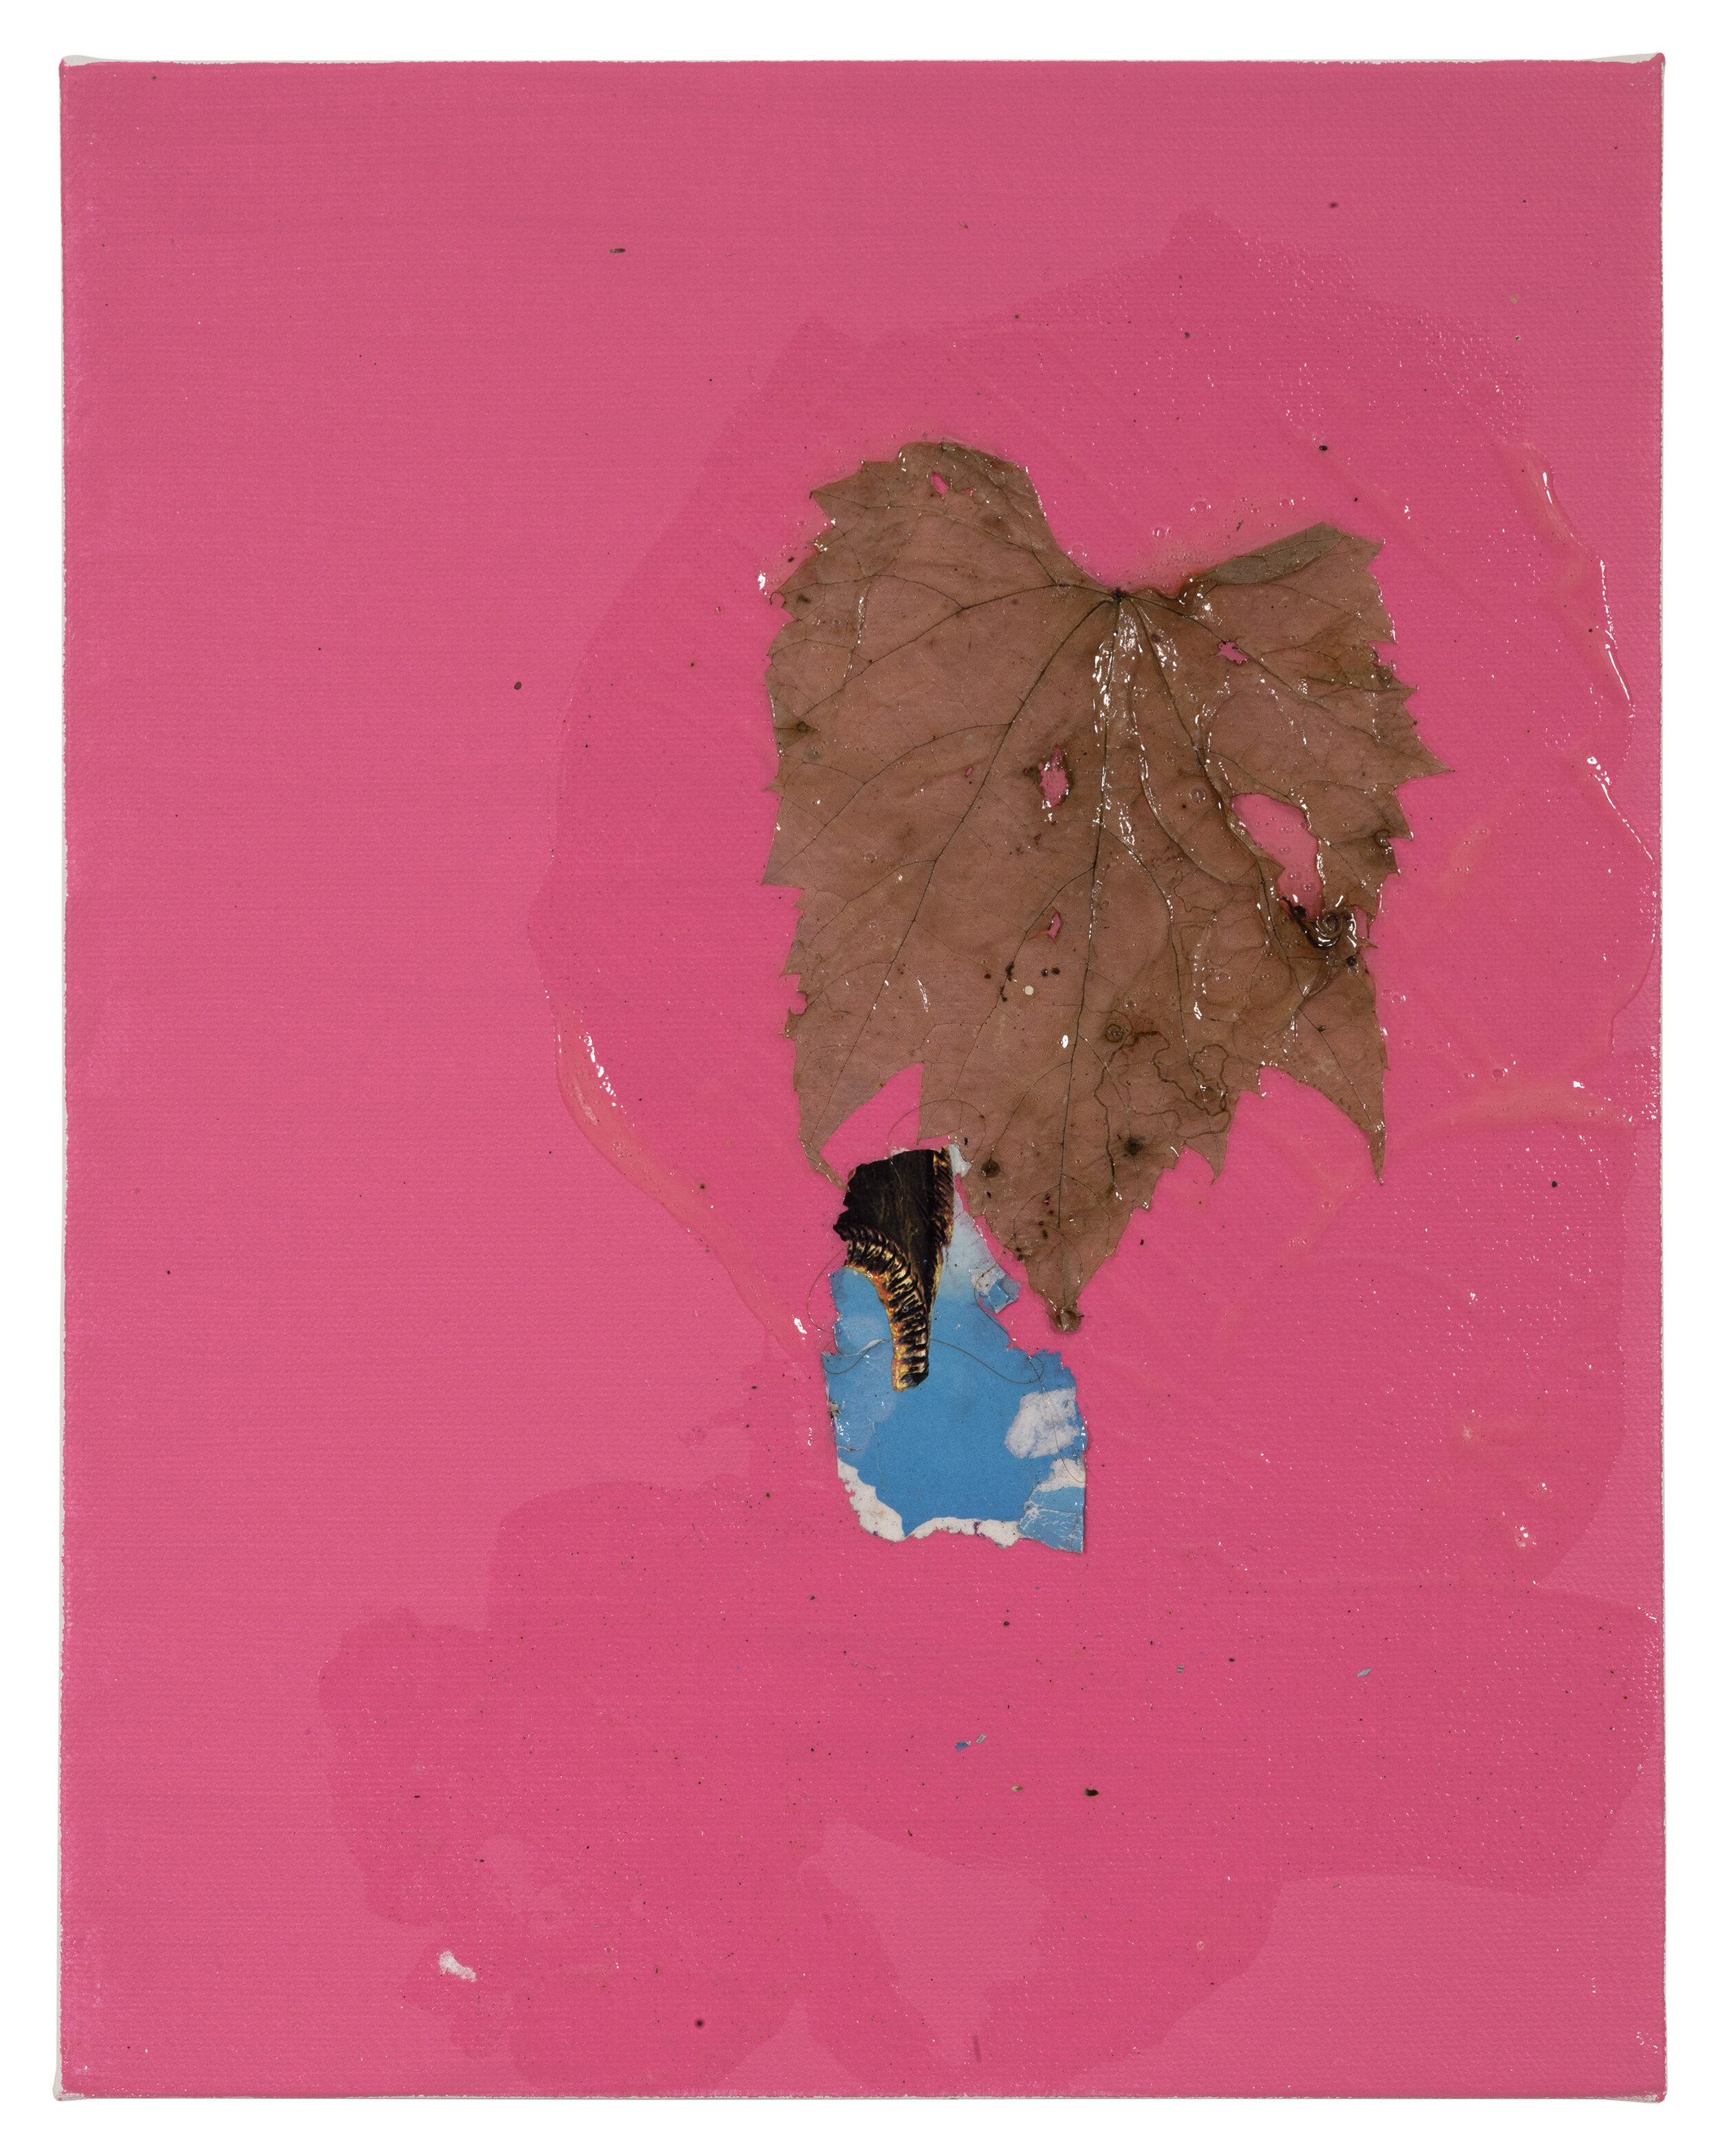  Drew Beattie  Leafman   2019 acrylic, leaf and collage on canvas 14 x 11 inches 